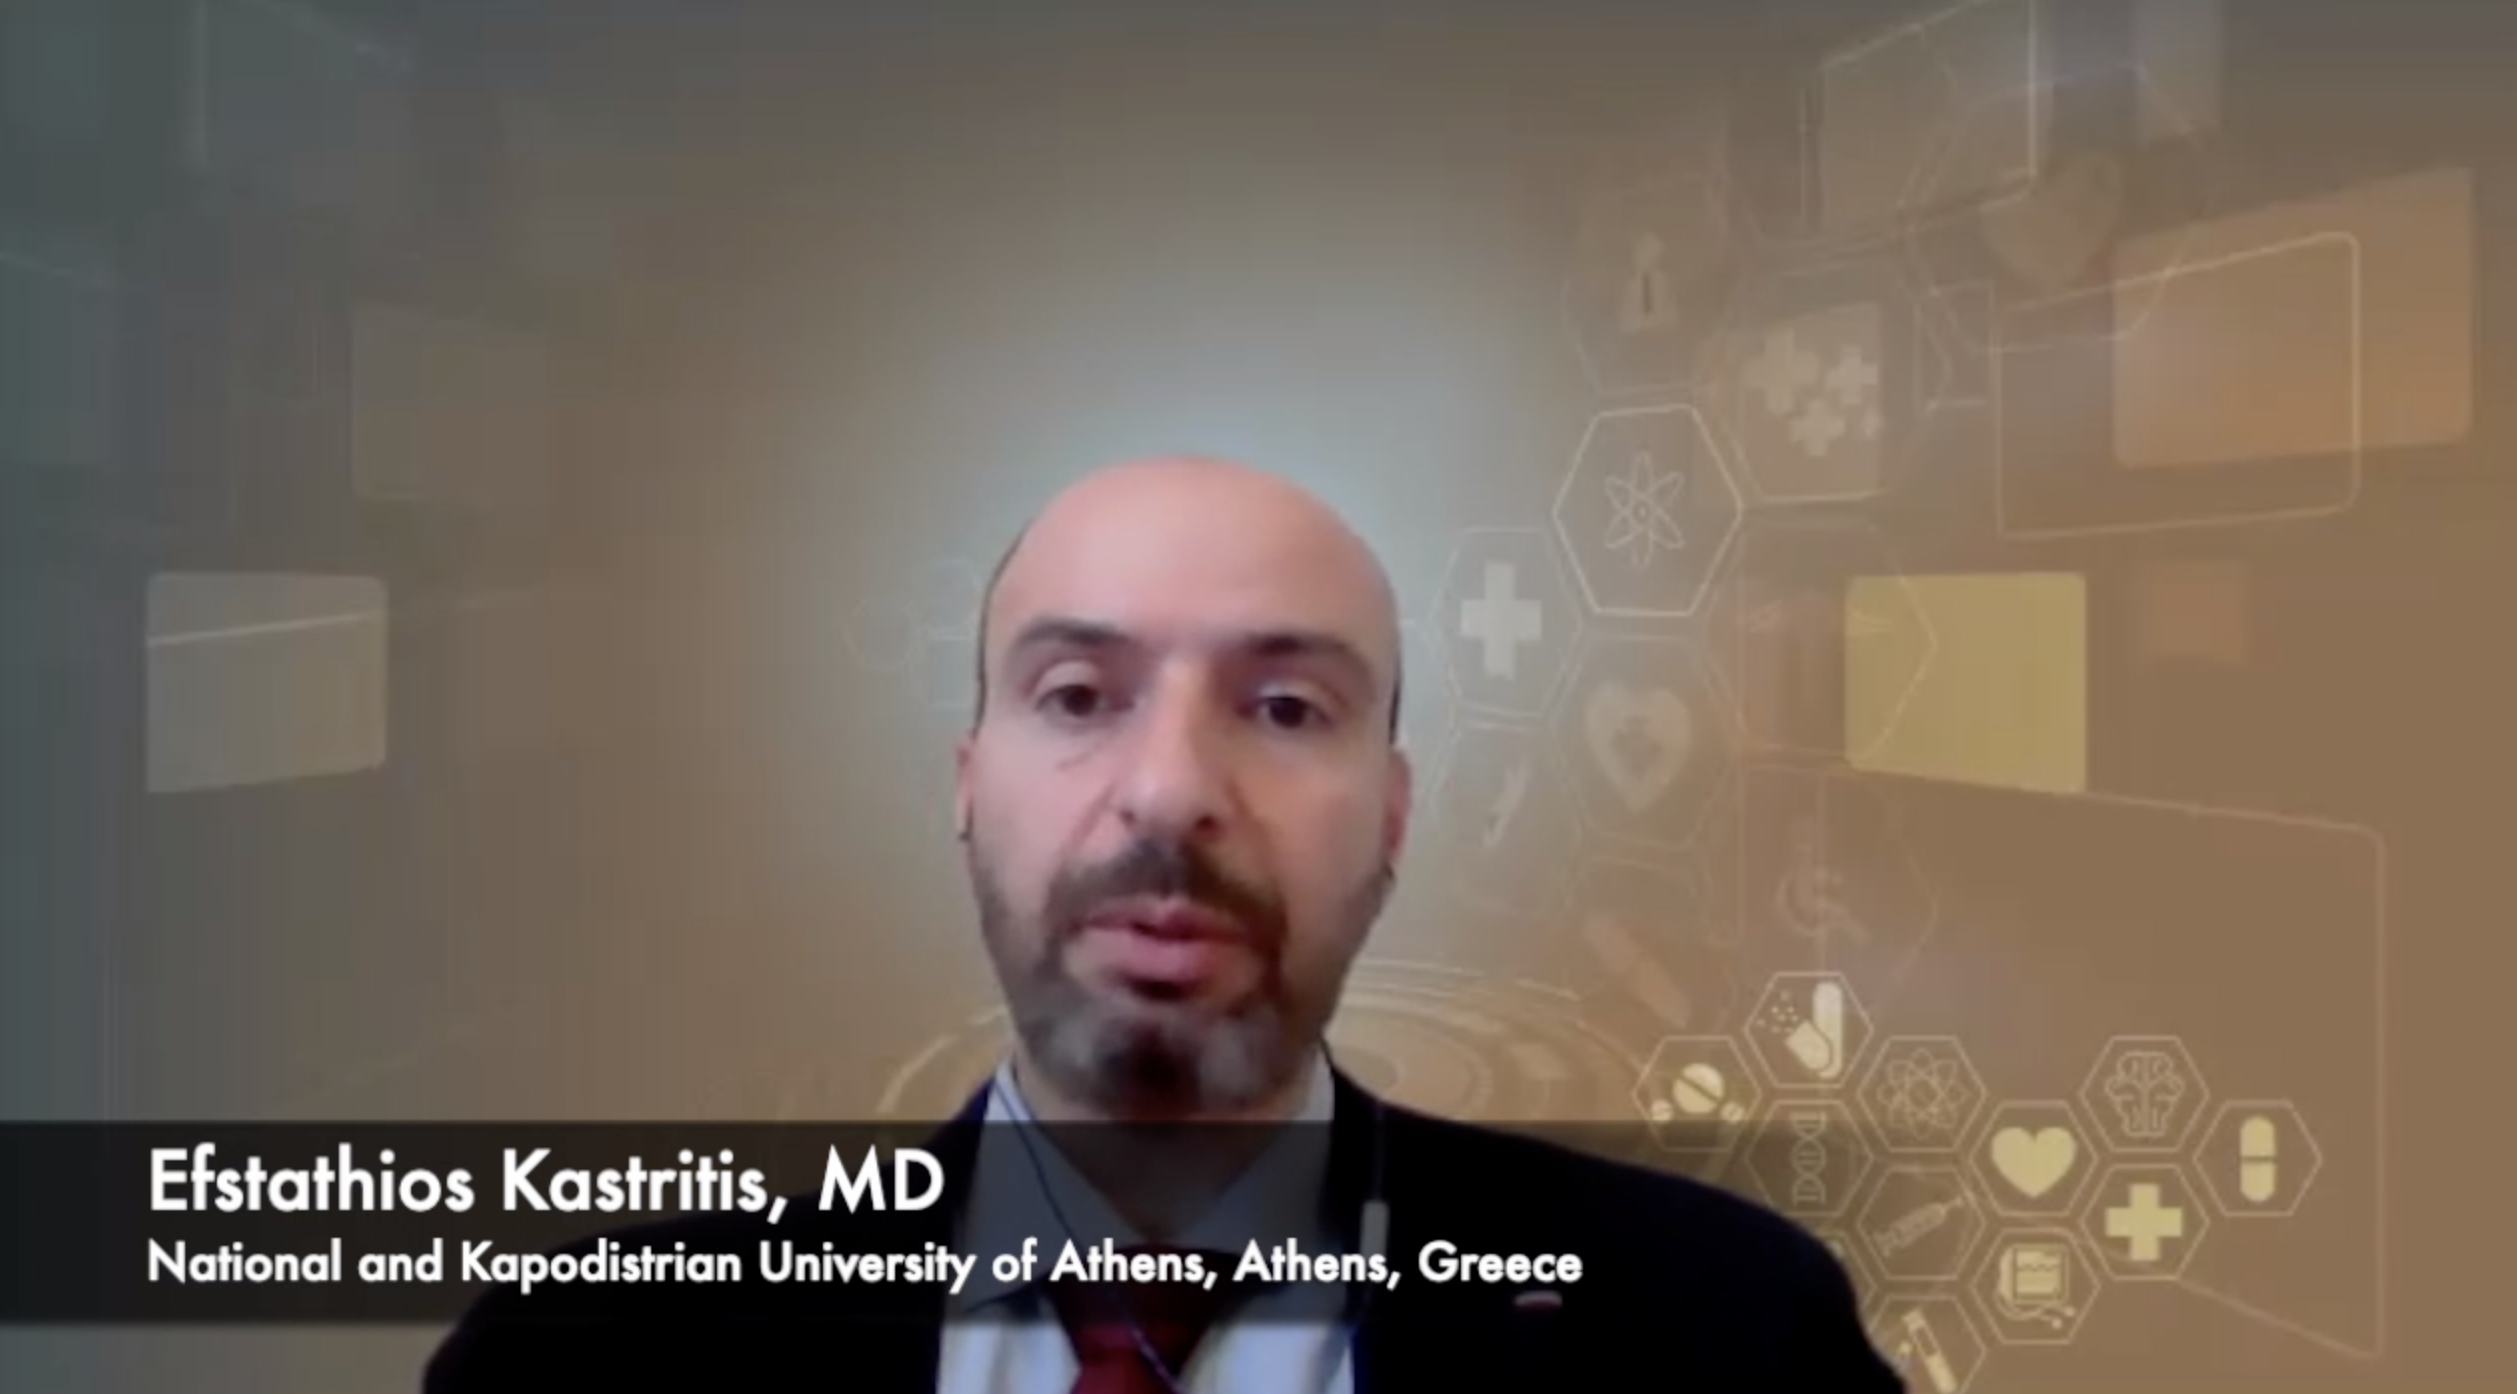 Efstathios Kastritis, MD, on Implications of Positive Results From the Phase 3 ANDROMEDA Study